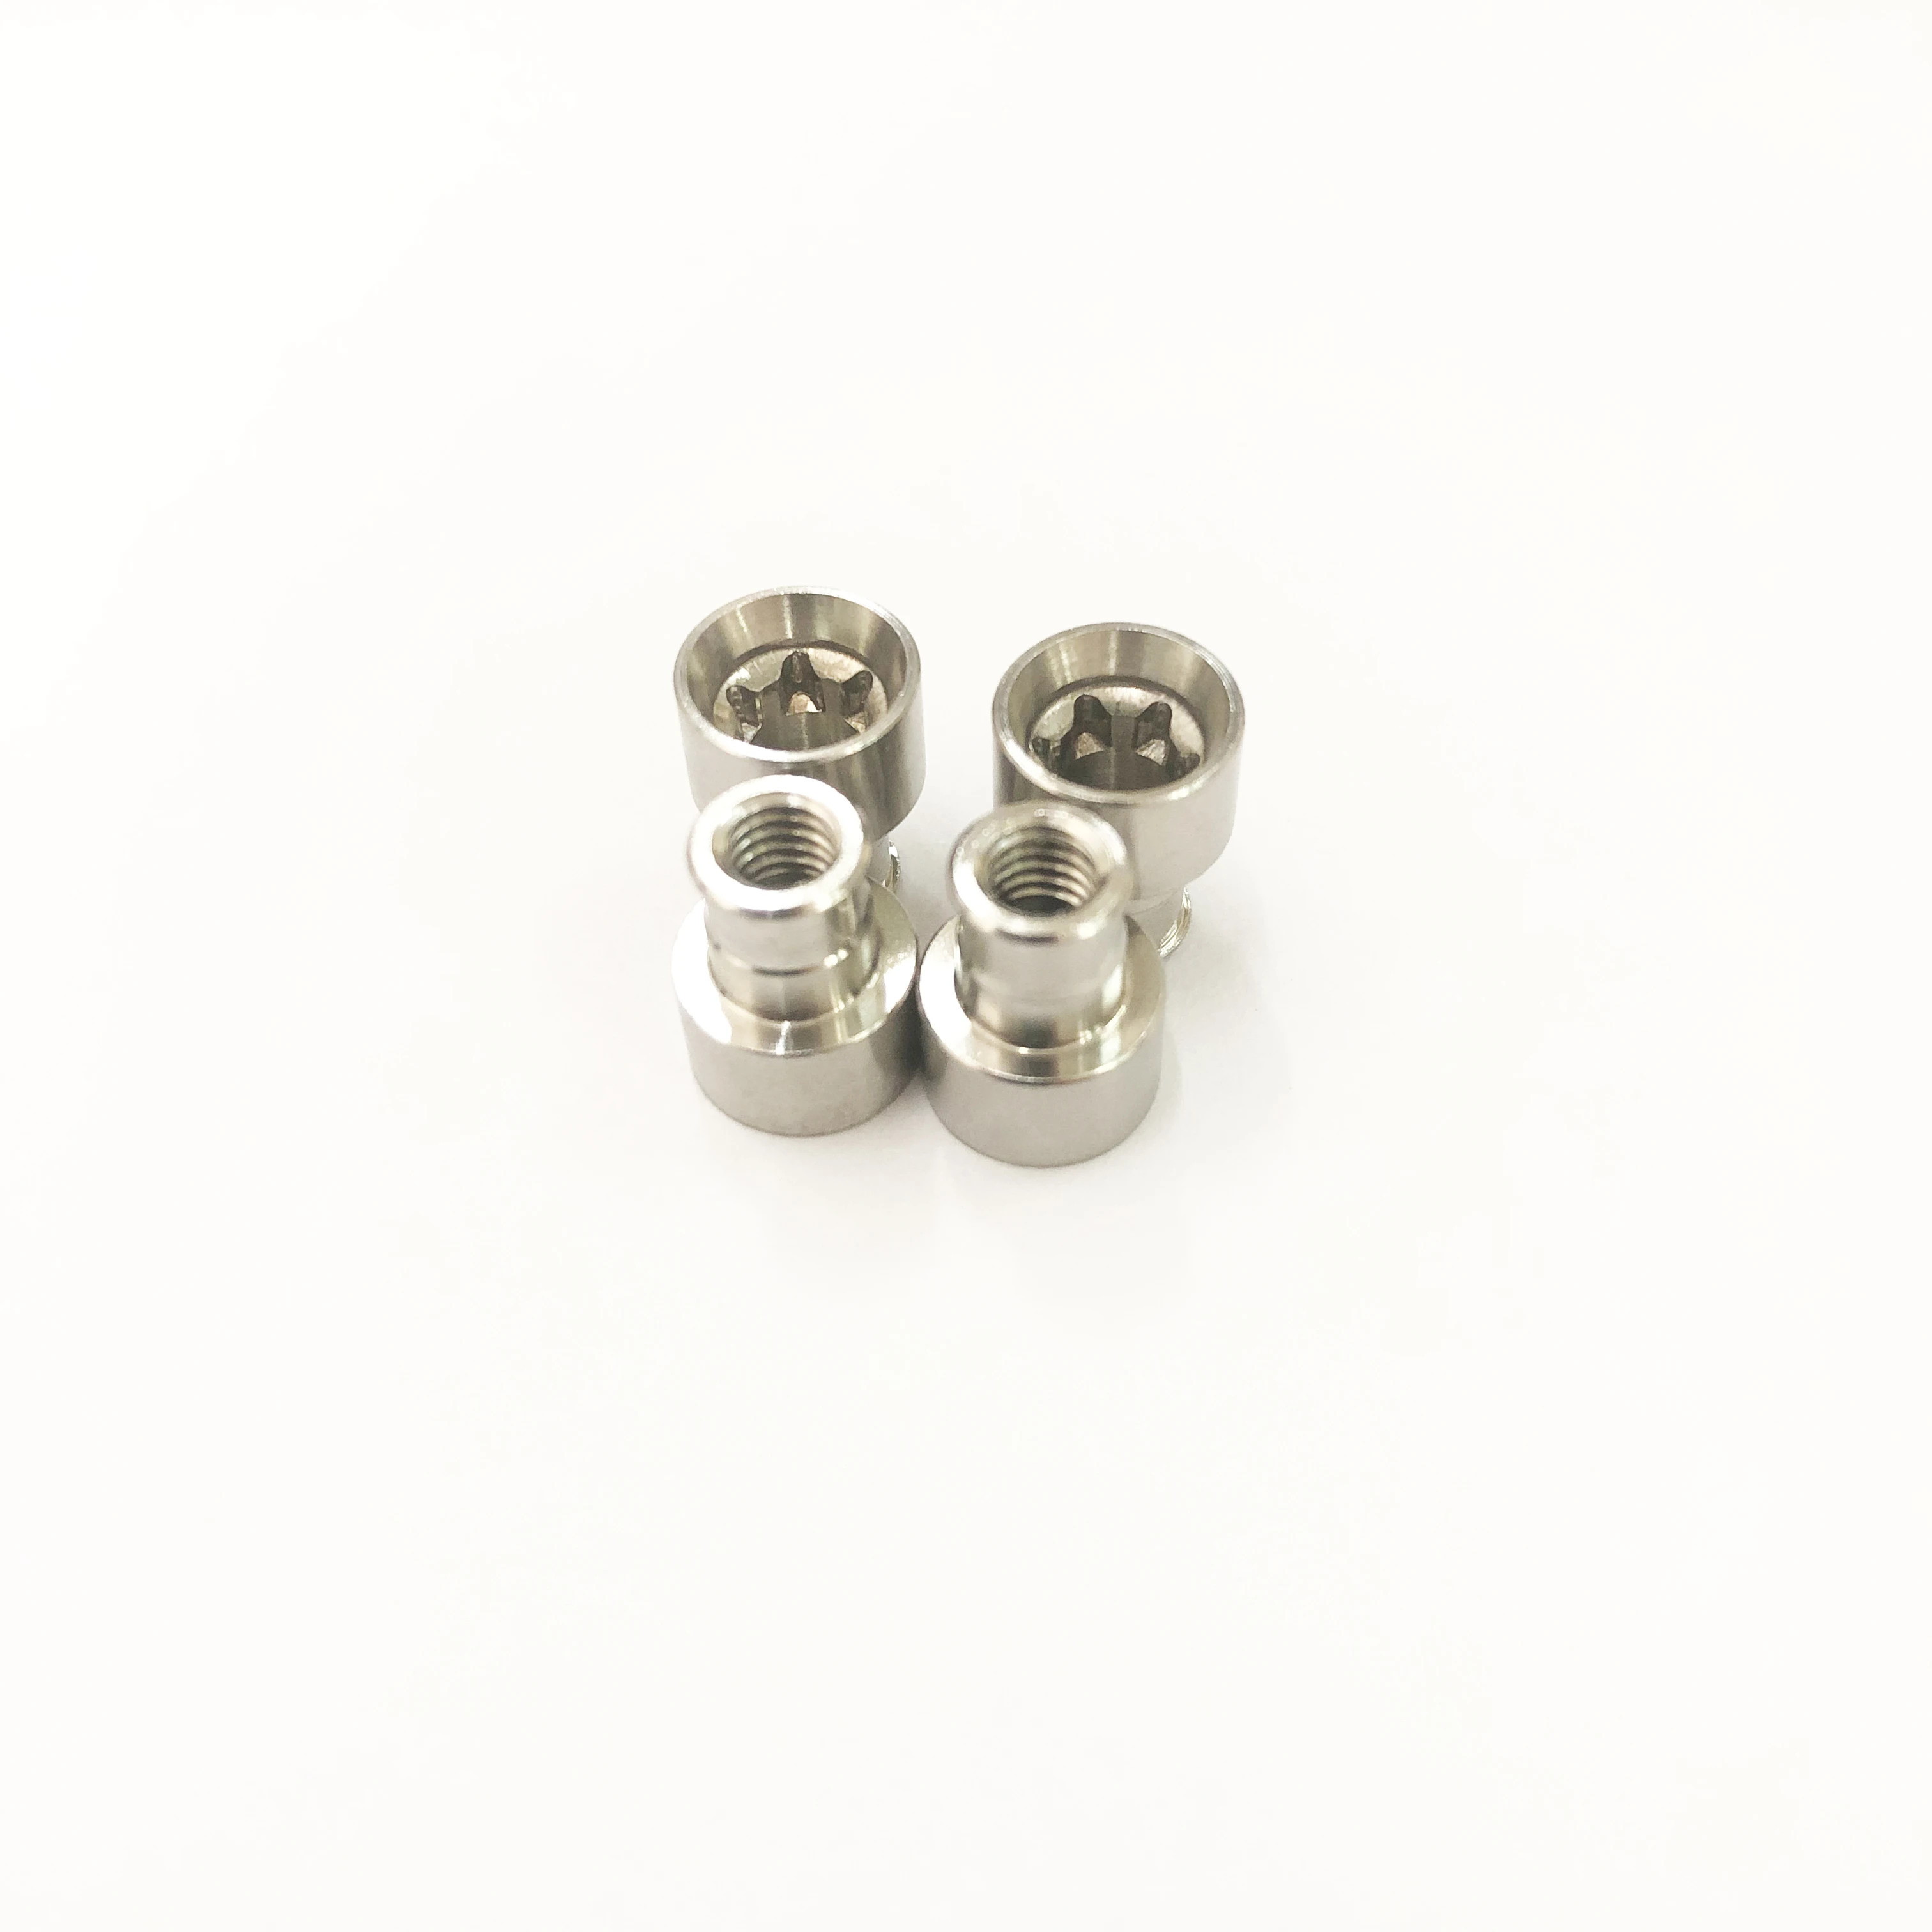 Hot sale stainless steel round nut support column computer case motherboard screw nut